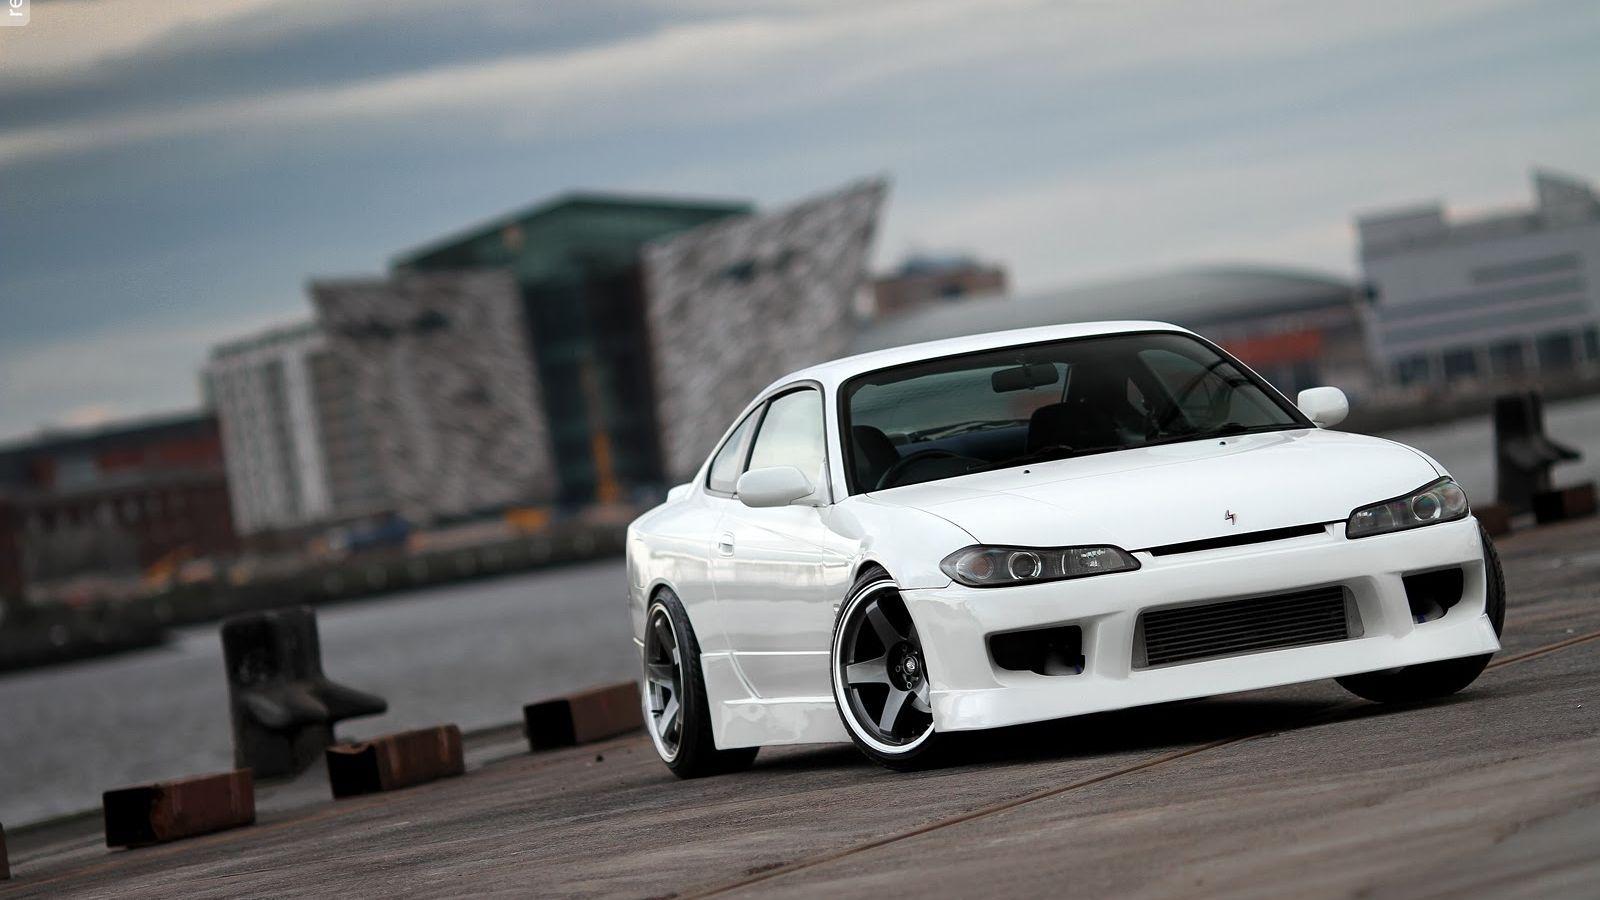 S15 Wallpapers Top Free S15 Backgrounds Wallpaperaccess